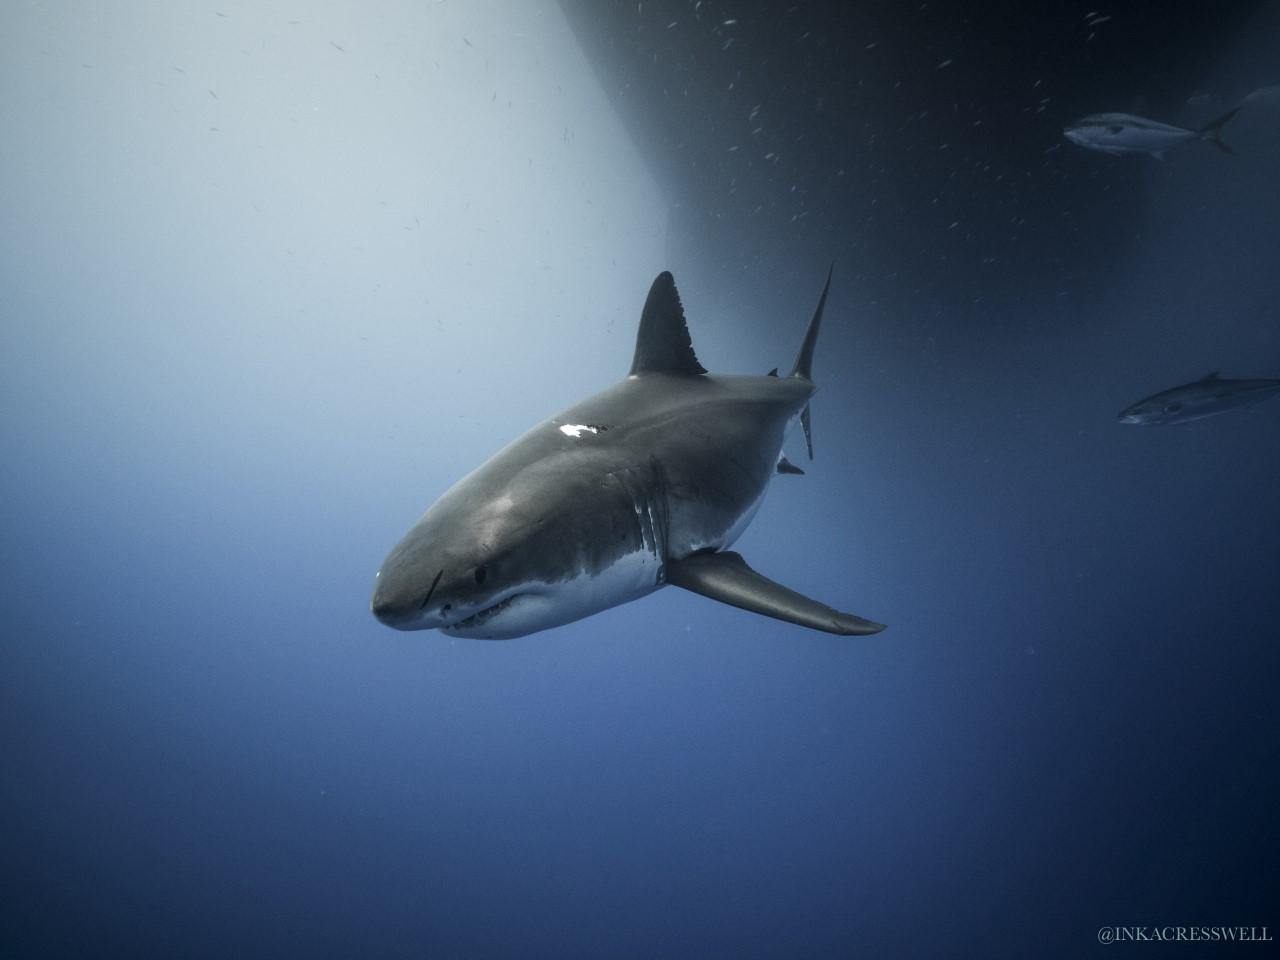 Photograph of great white shark